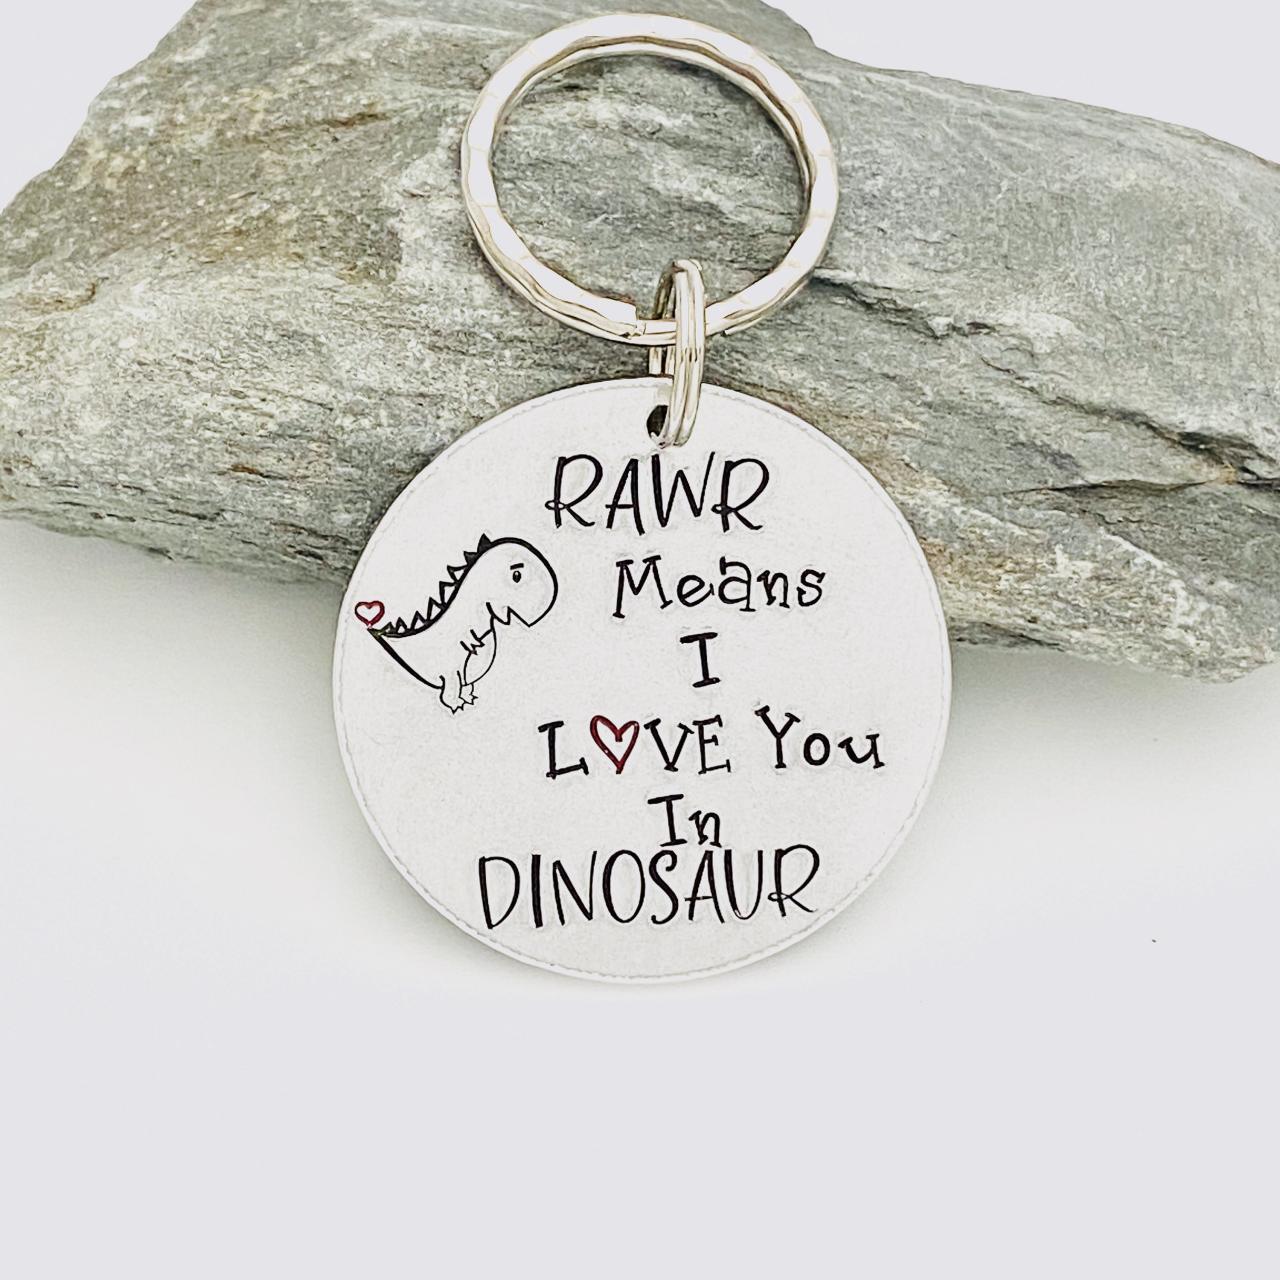 Rawr Means I Love You In Dinosaur, Dinosaur Keyring, Dino Keychain, Valentines Gift, Gift For Husband , Mothers Day Present, Anniversary